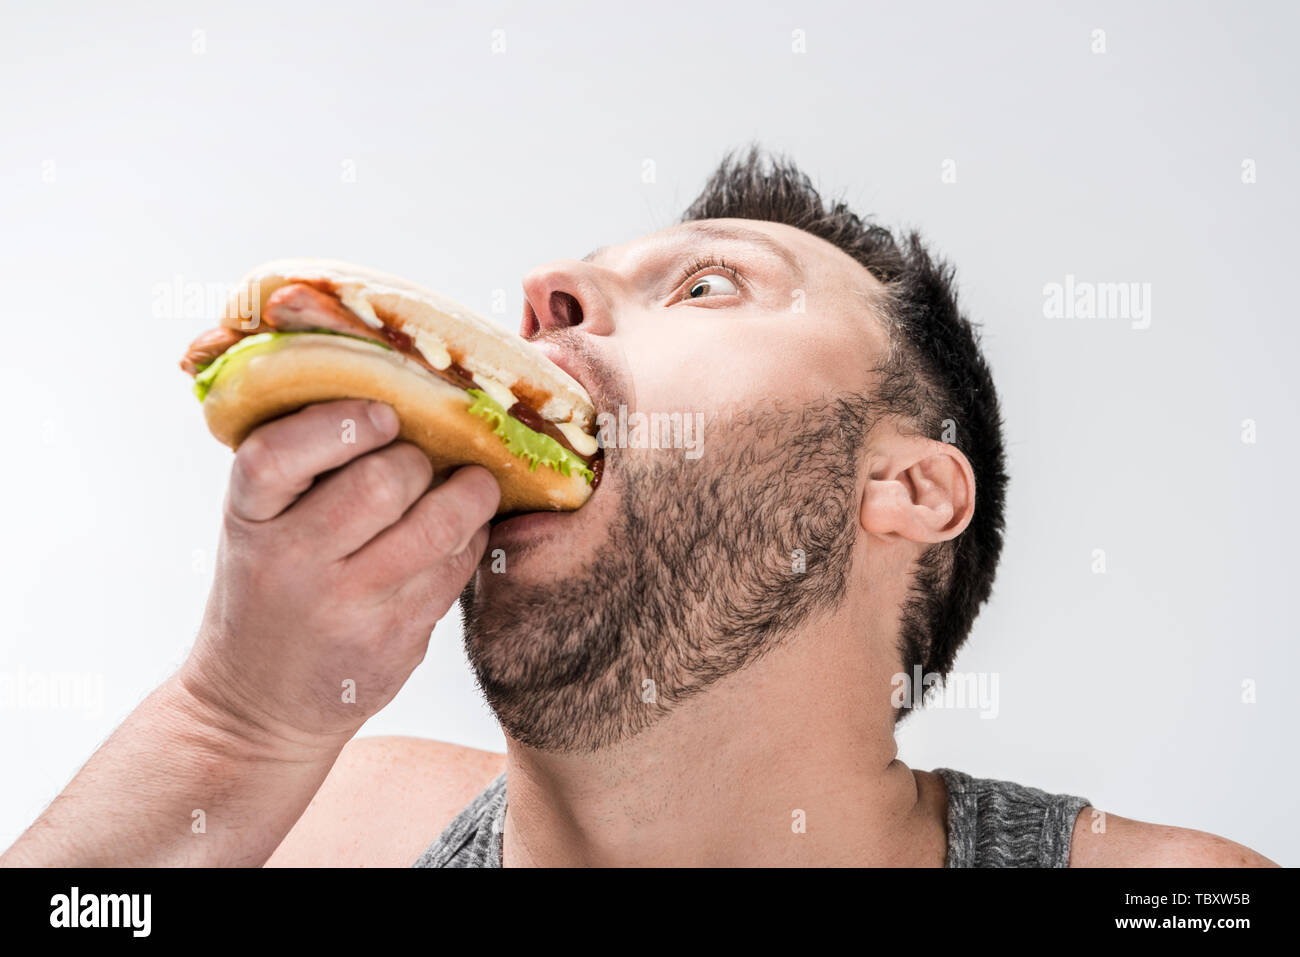 close up view of overweight man in tank top eating hot dog isolated on white Stock Photo